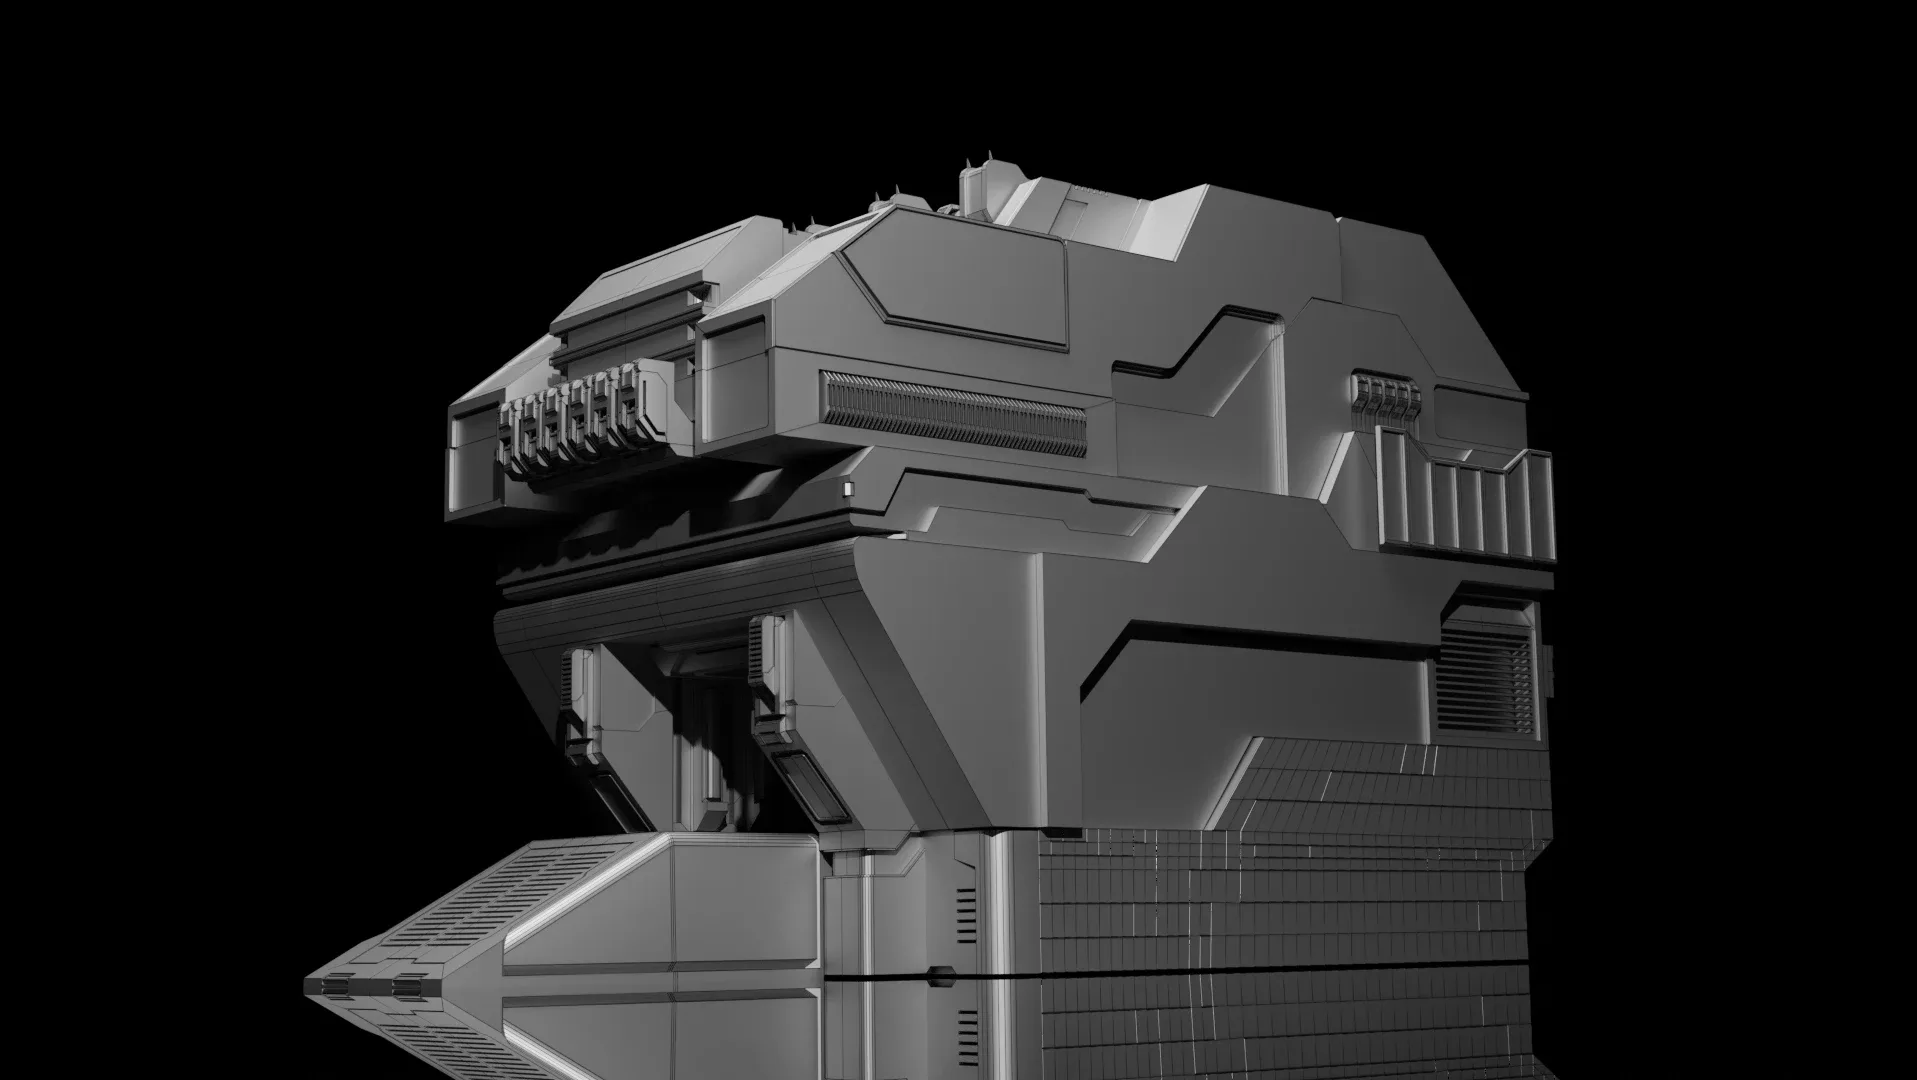 5 SCI-FI BUILDING GAME ASSETS (POLY OPTIMALI)